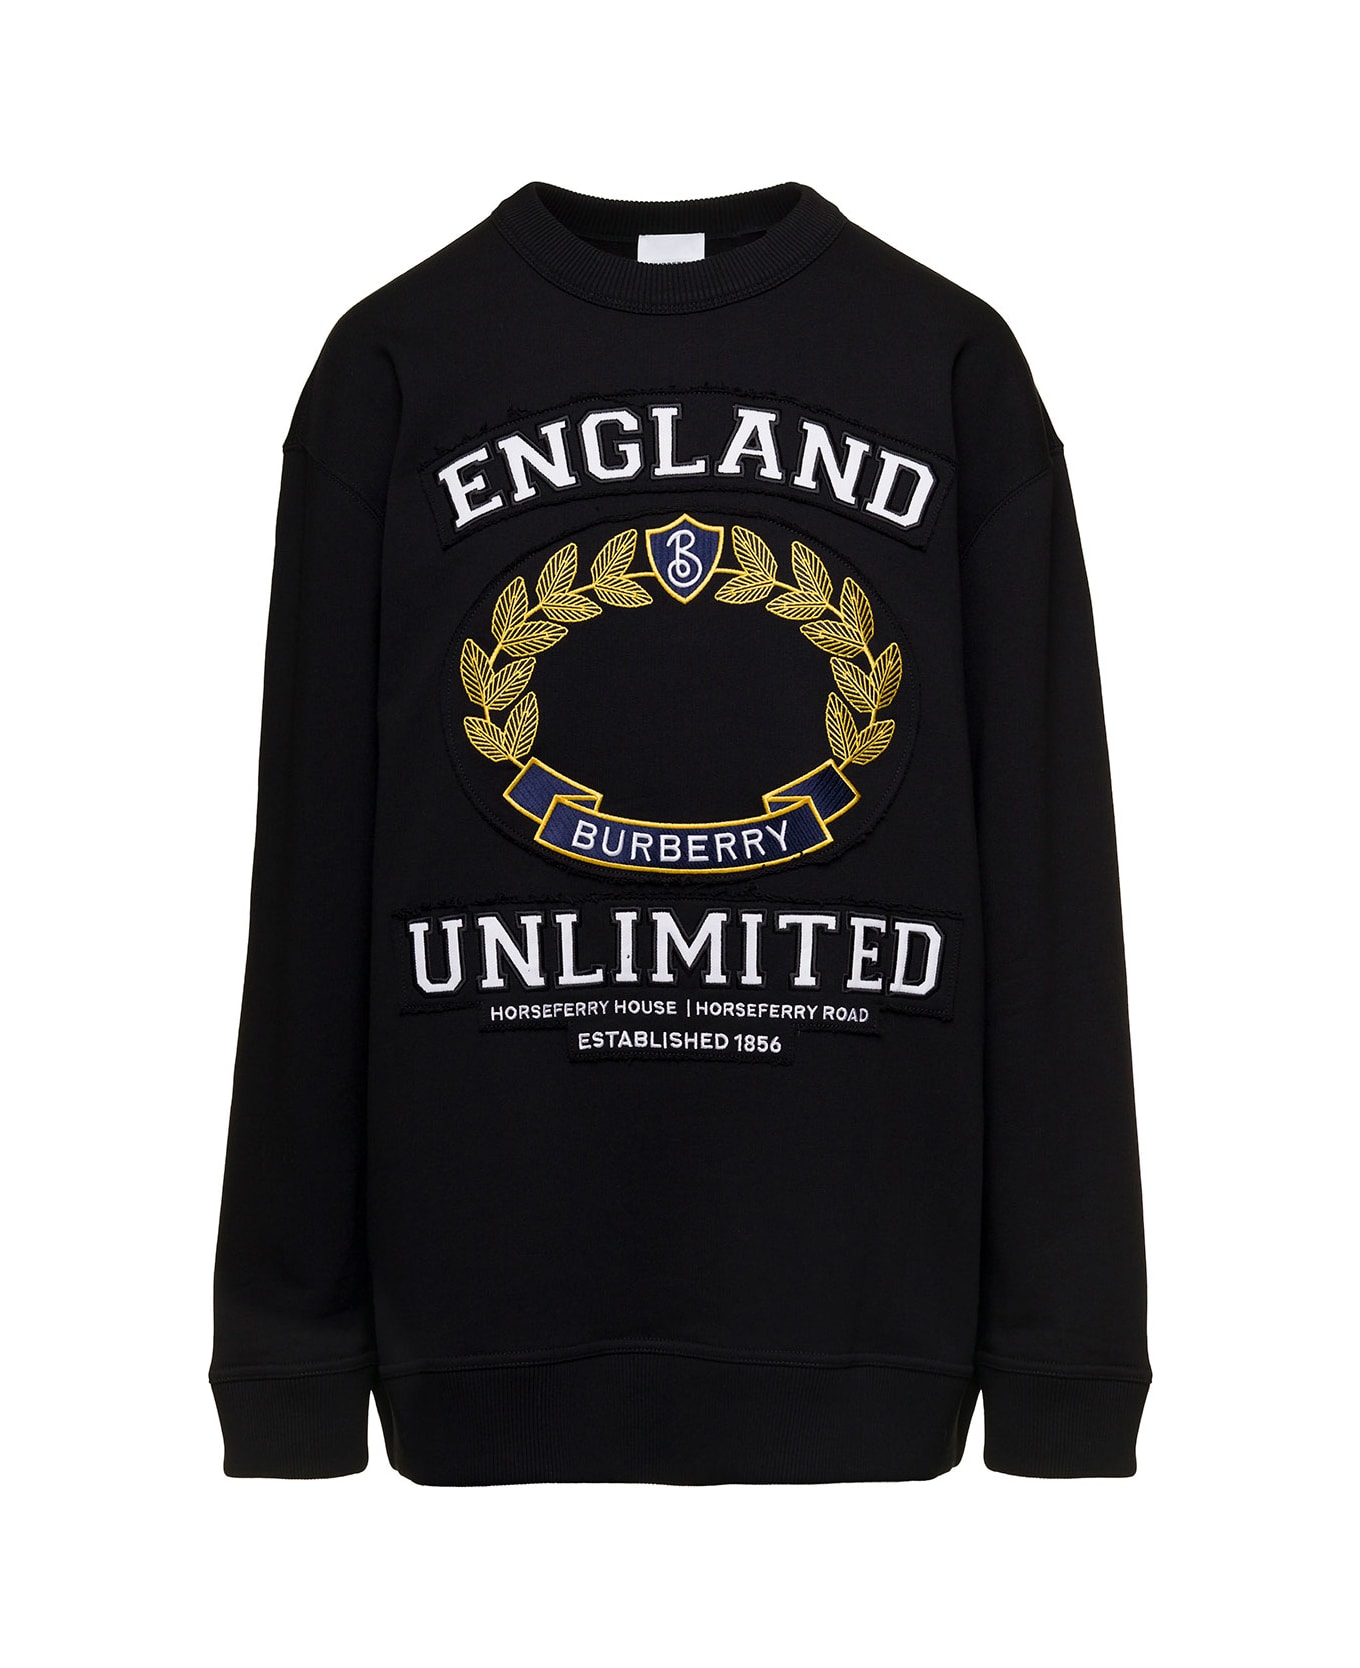 Burberry Black Crewneck Sweatshirt With Logo Print And Embroidered Crest In Cotton Woman - Black